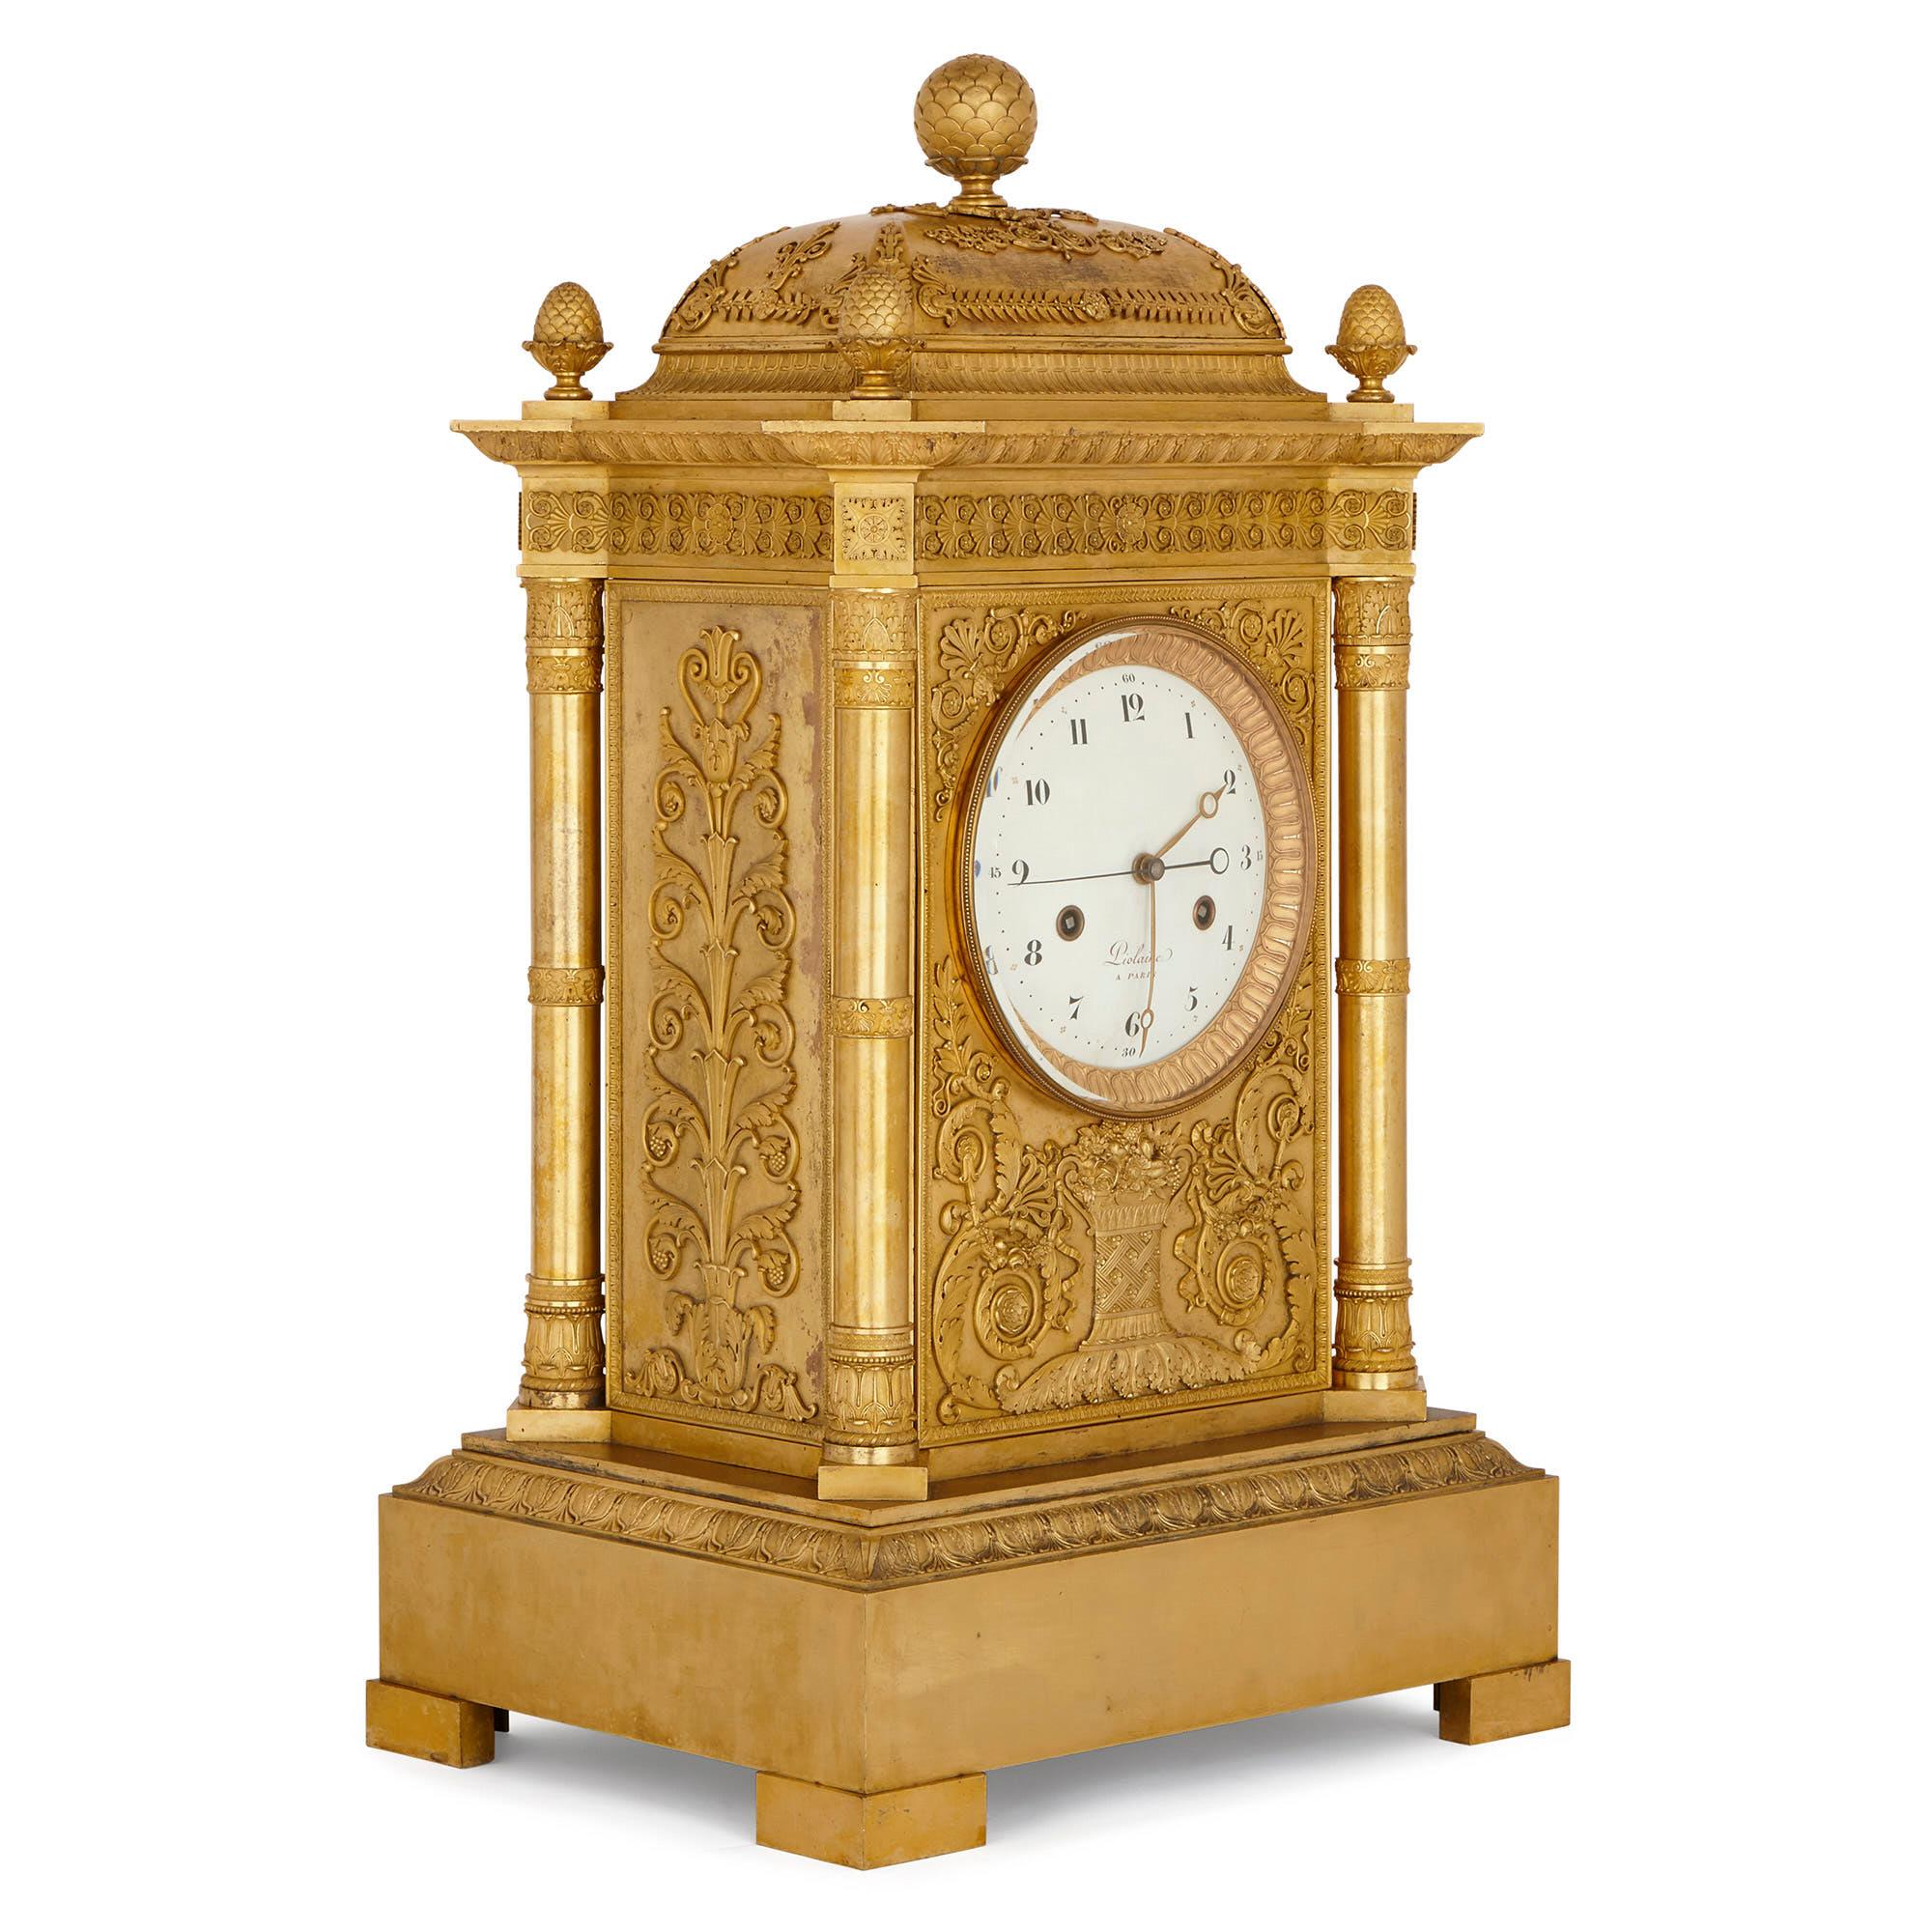 This magnificent mantel clock—which measures an impressive 82cm in height—was crafted in France, in the period when Napoleon I was Emperor (1804-1814, 1815). The clock was crafted by Michel-François Piolaine, an important clock-maker, working in